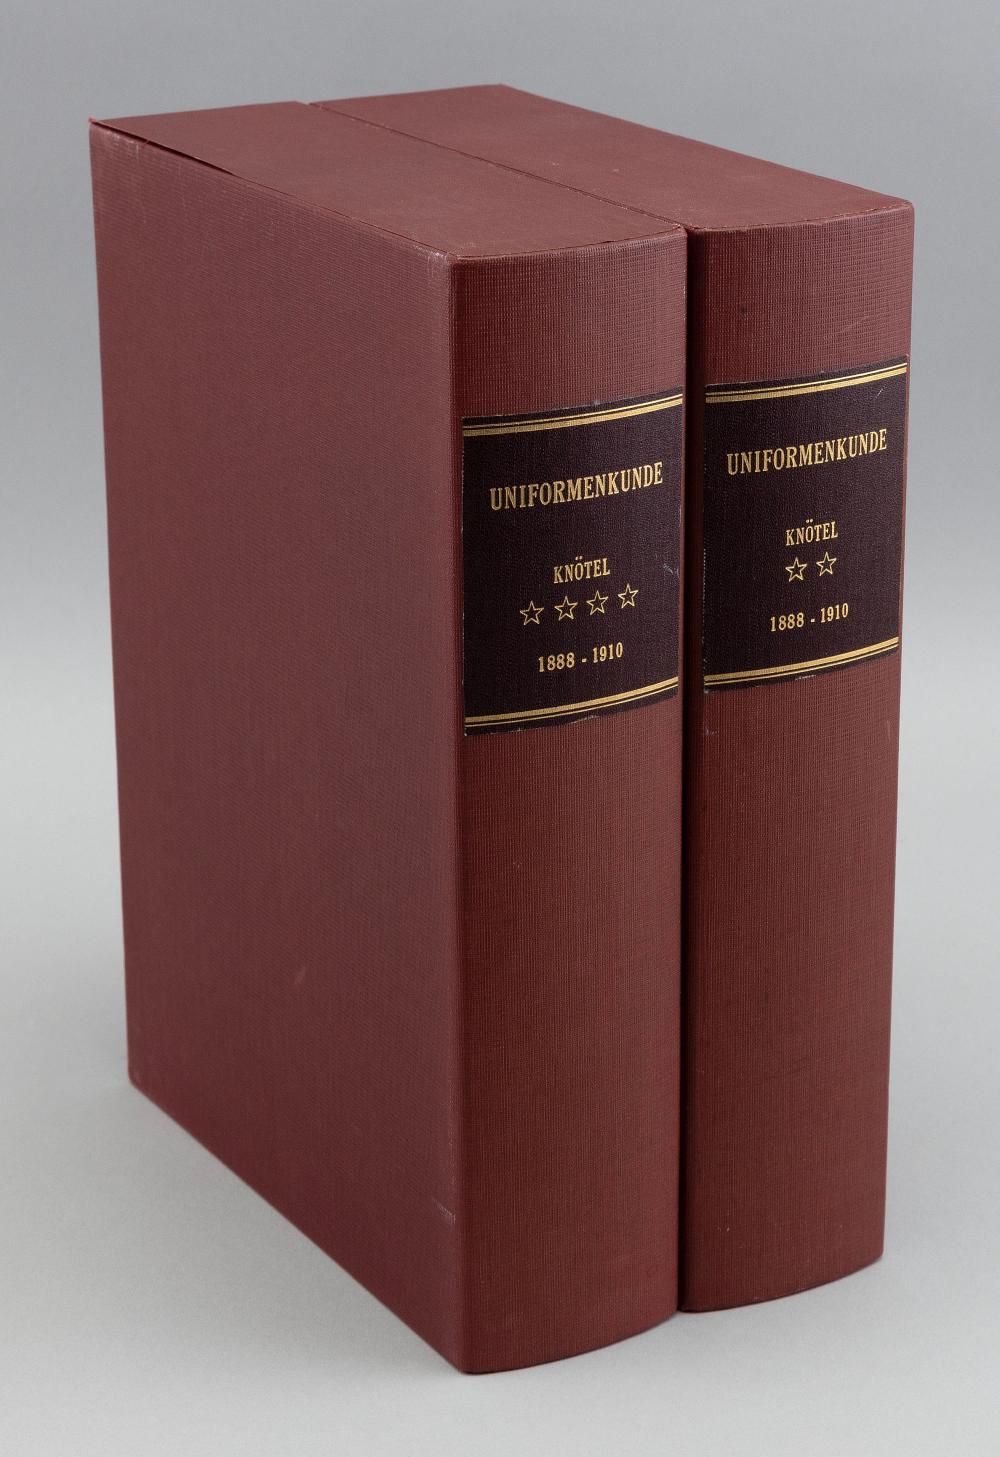 TWO VOLUMES OF UNIFORMENKUNDE  3527d9